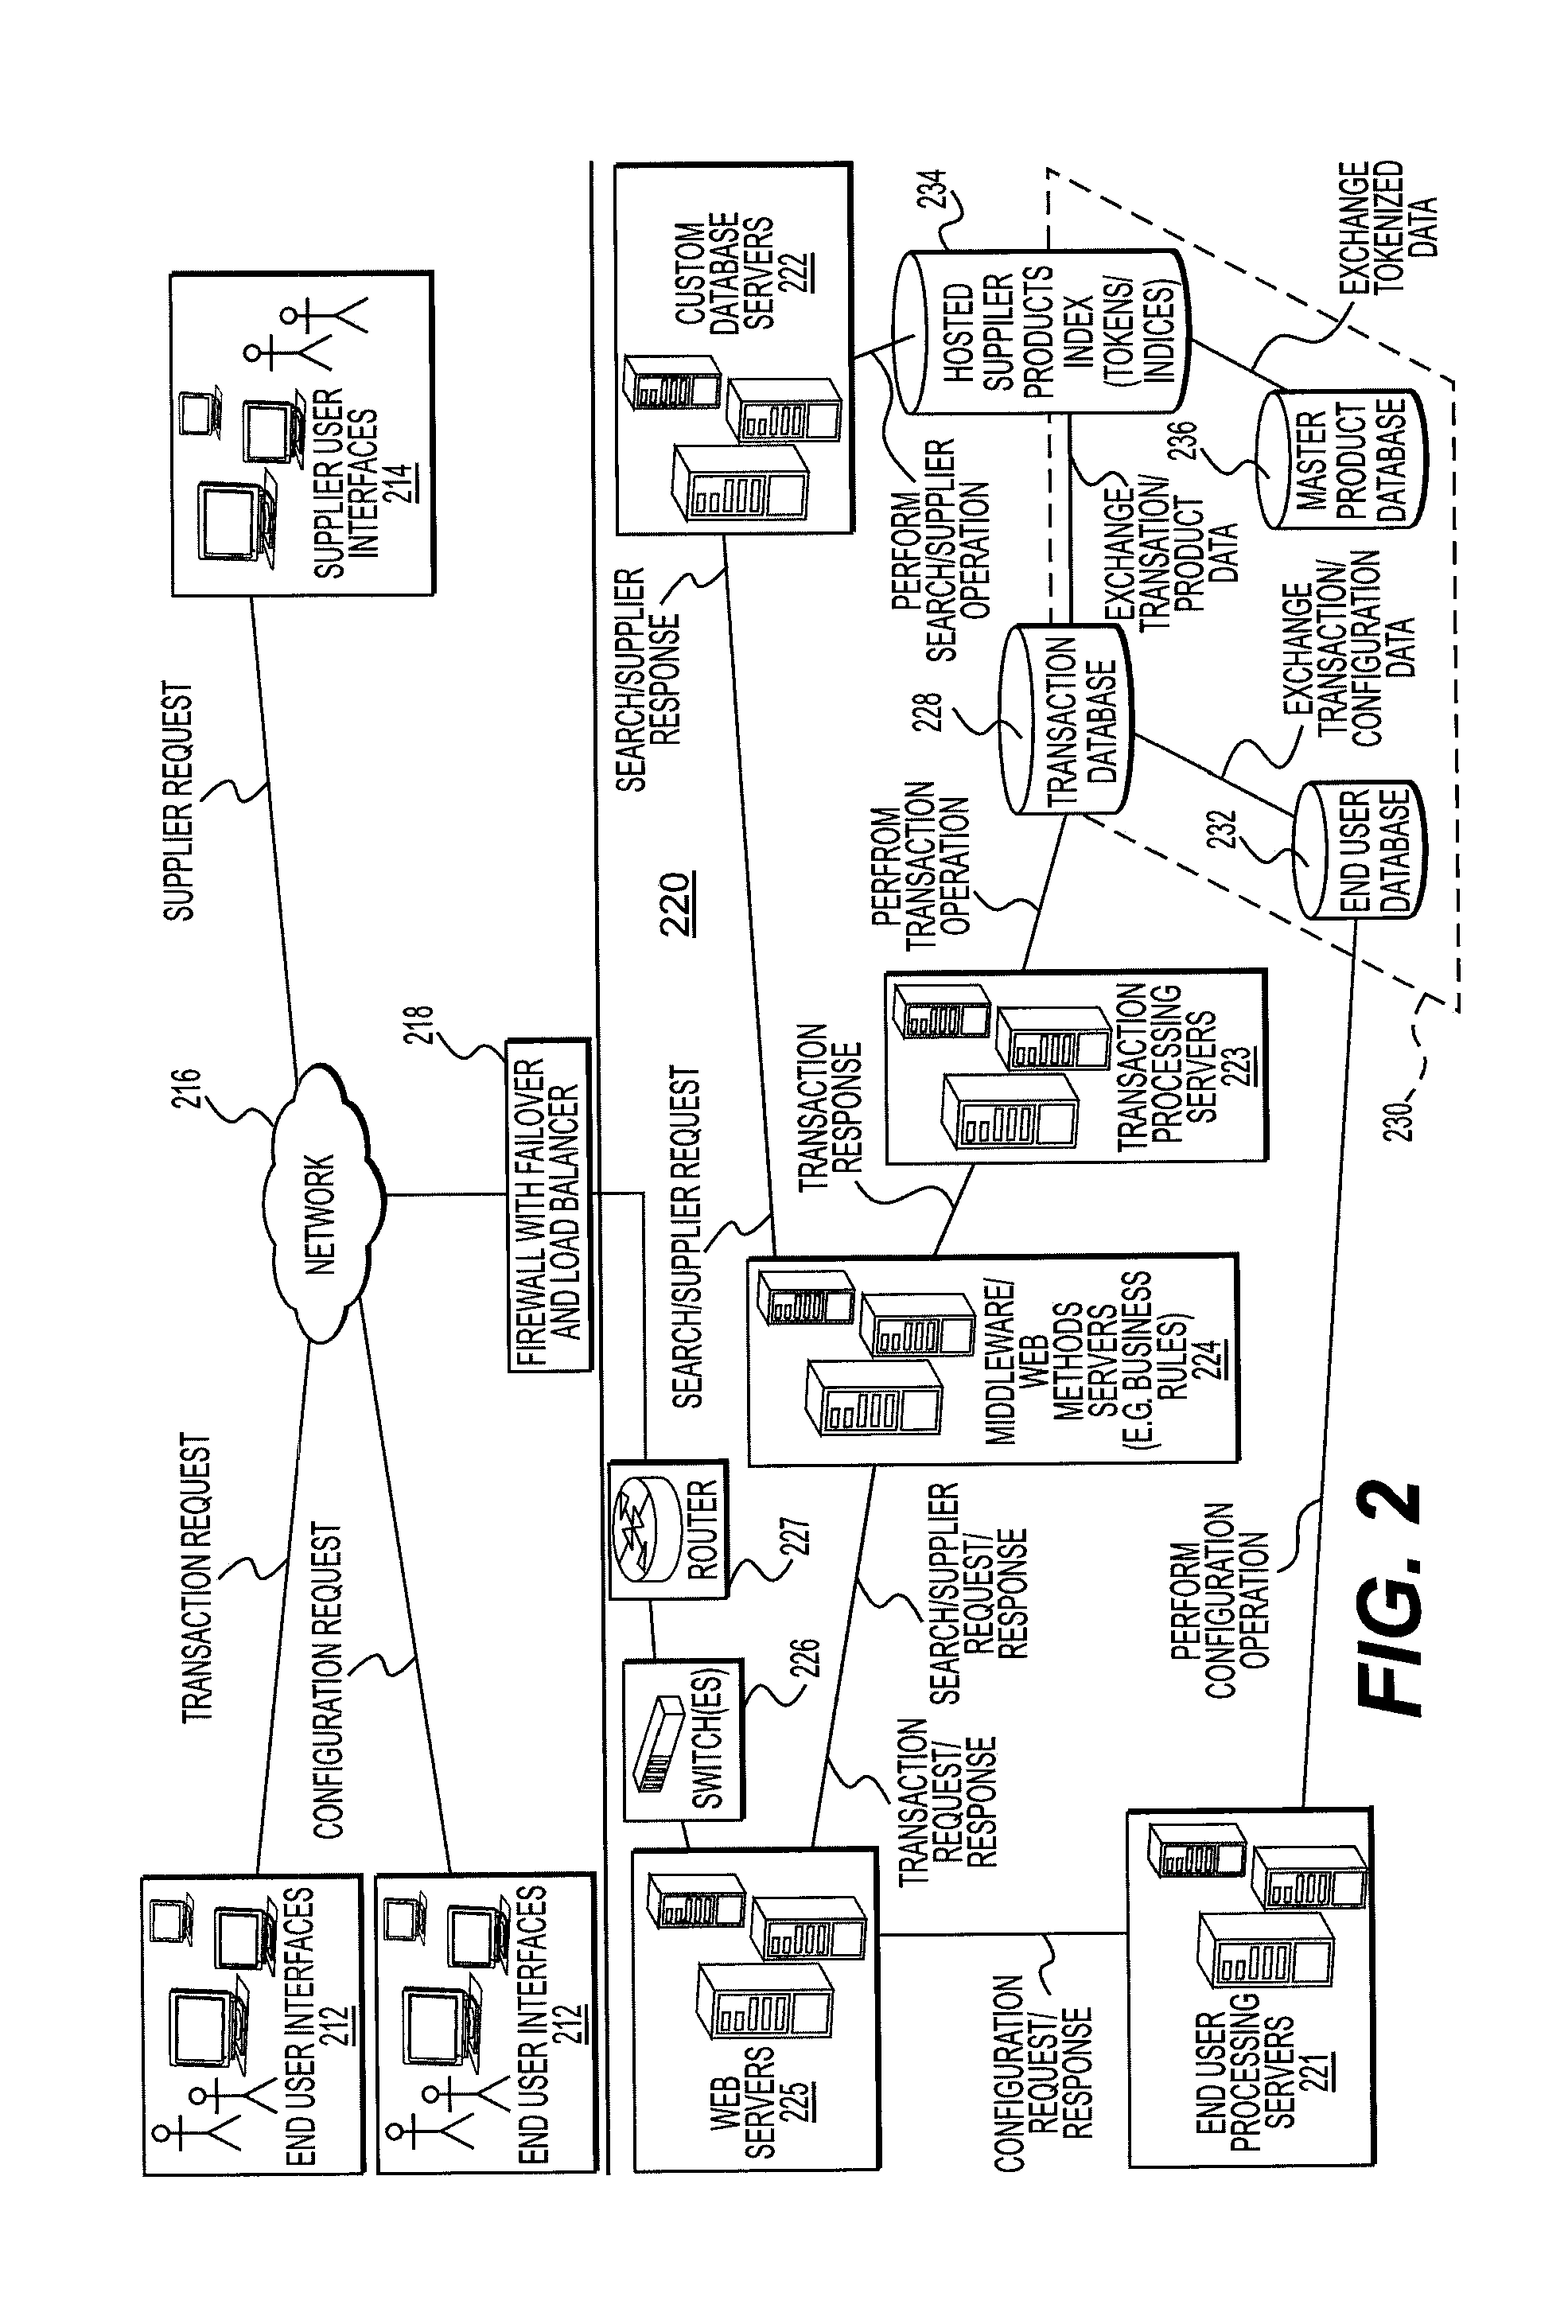 Systems and Methods for Managing Supplier Information Between an Electronic Procurement System and Buyers' Supplier Management Systems